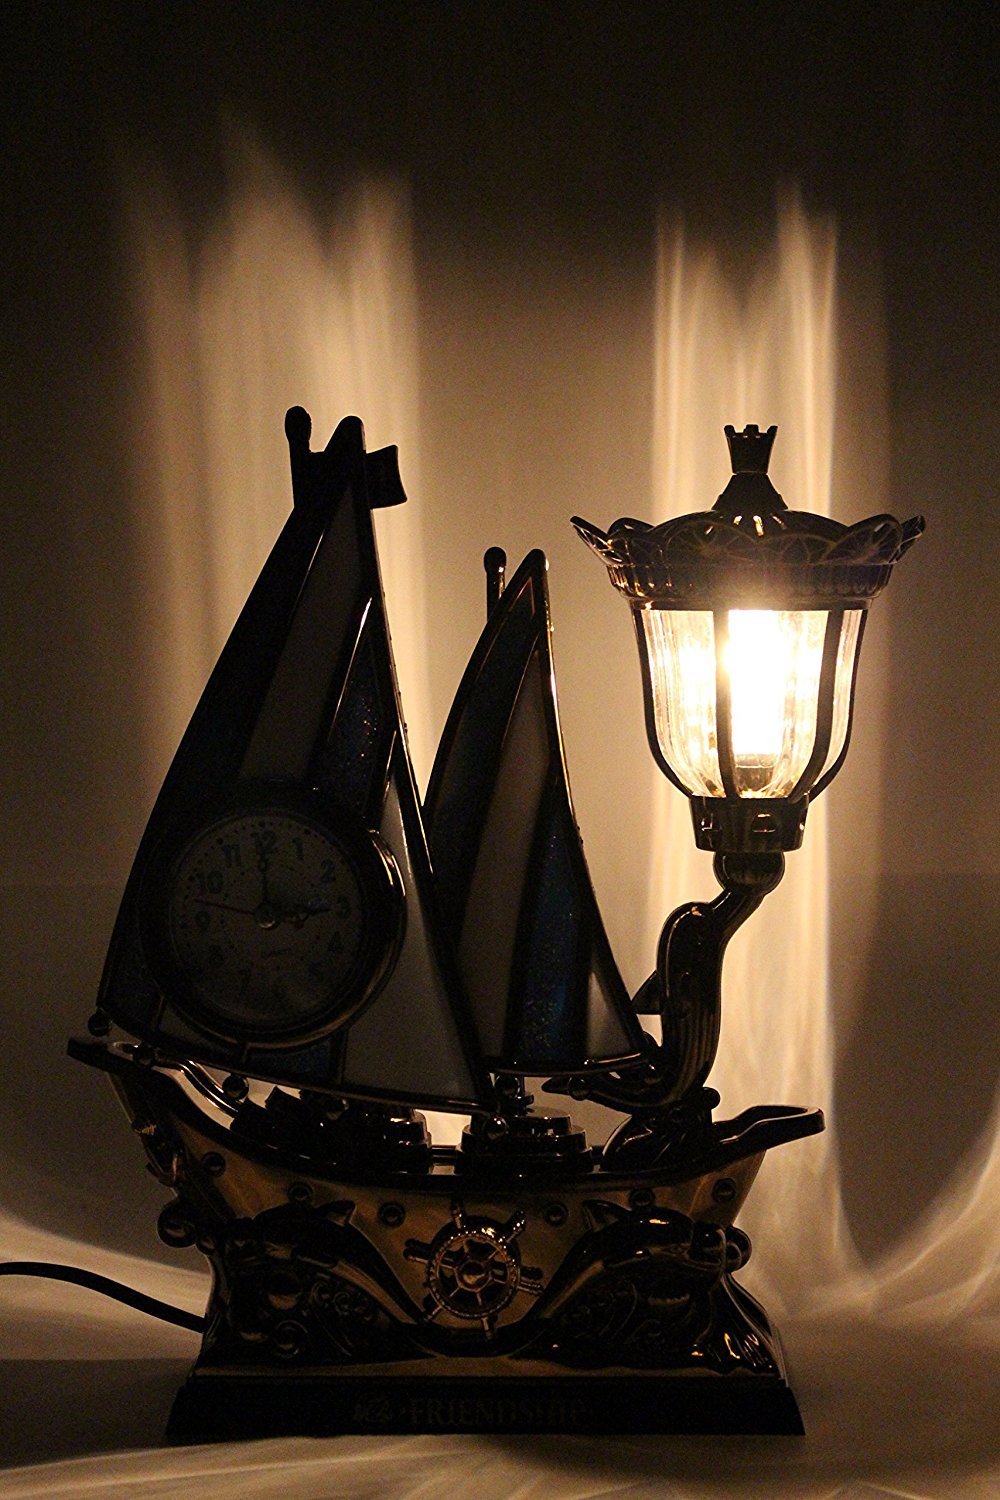 FunkyTradition Blue Golden Flag Vintage Pirates Ship Table Lamp with Alarm Clock for Christmas, Anniversary, Birthday Gift, Home and Office Decor - FunkyTradition